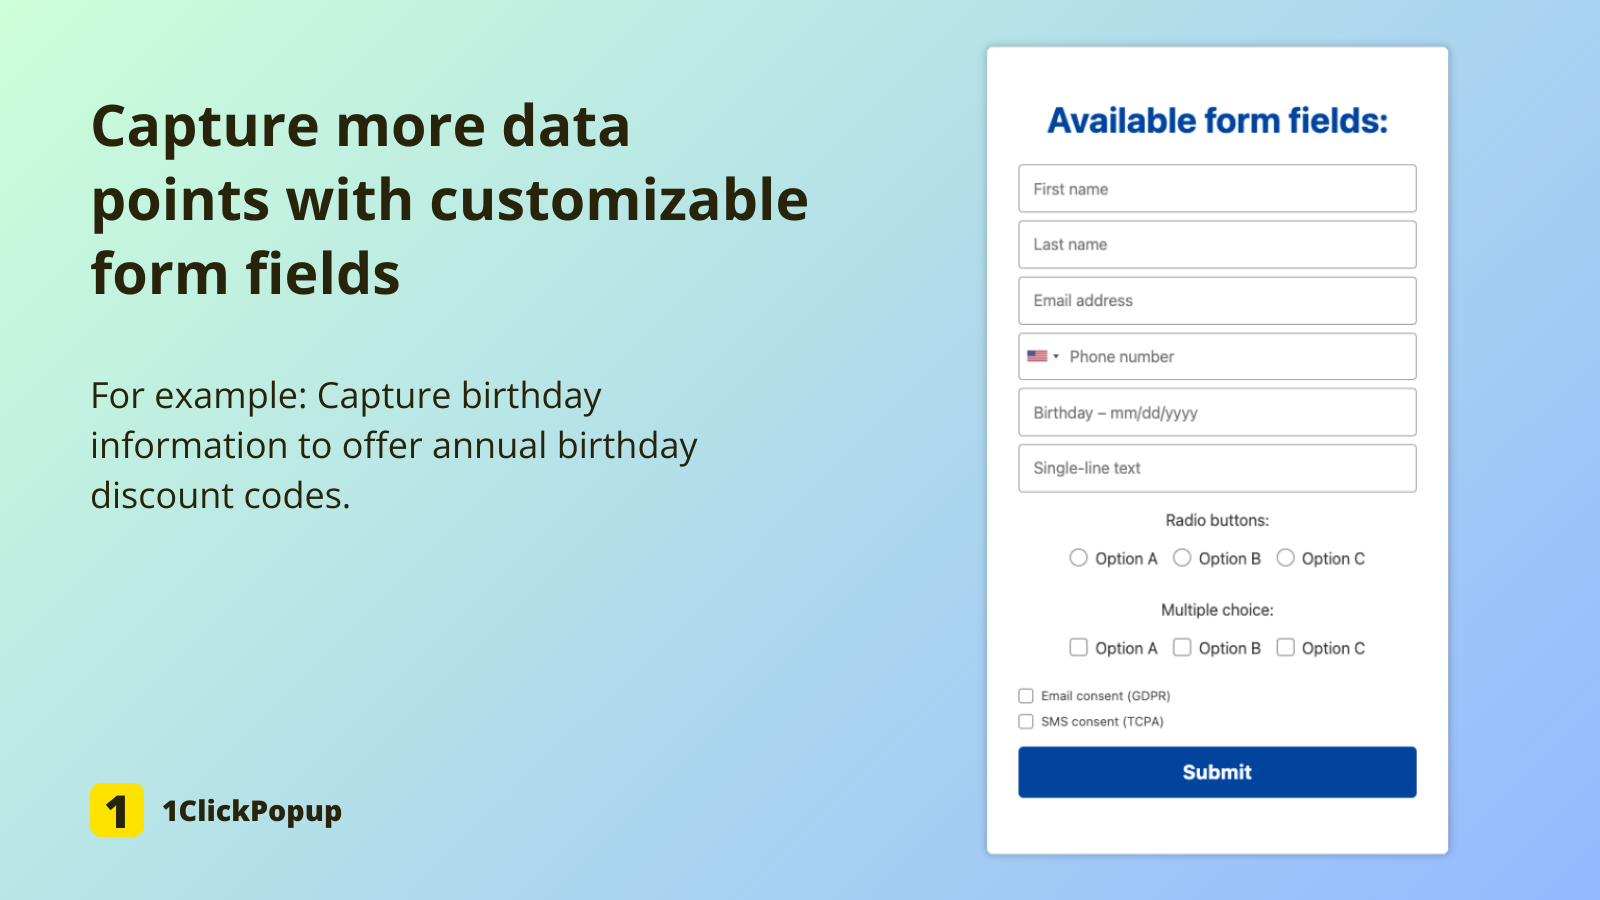 Capture more data points with customizable form fields